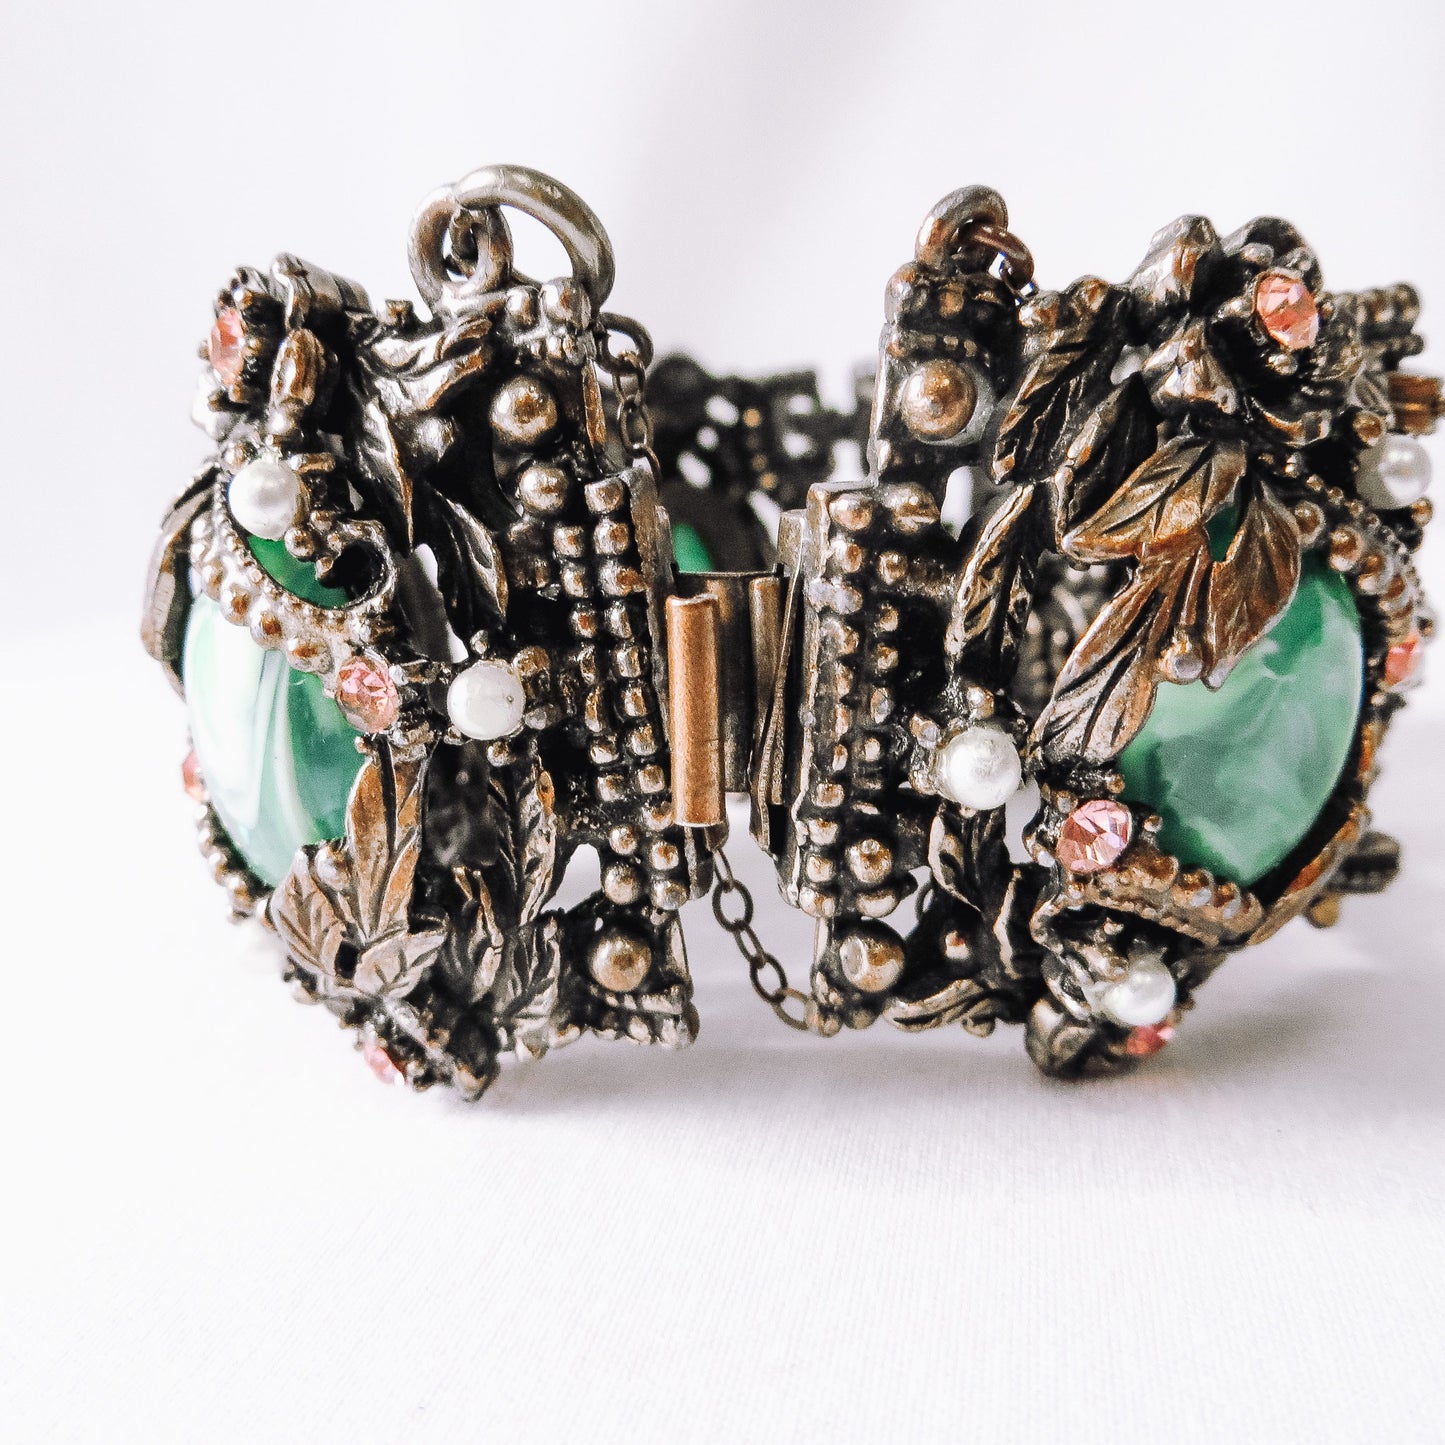 Vintage Victorian Gothic Bracelet, Green Stones with Pink Rhinestones and Faux Pearls, Unique Victorian Bracelet